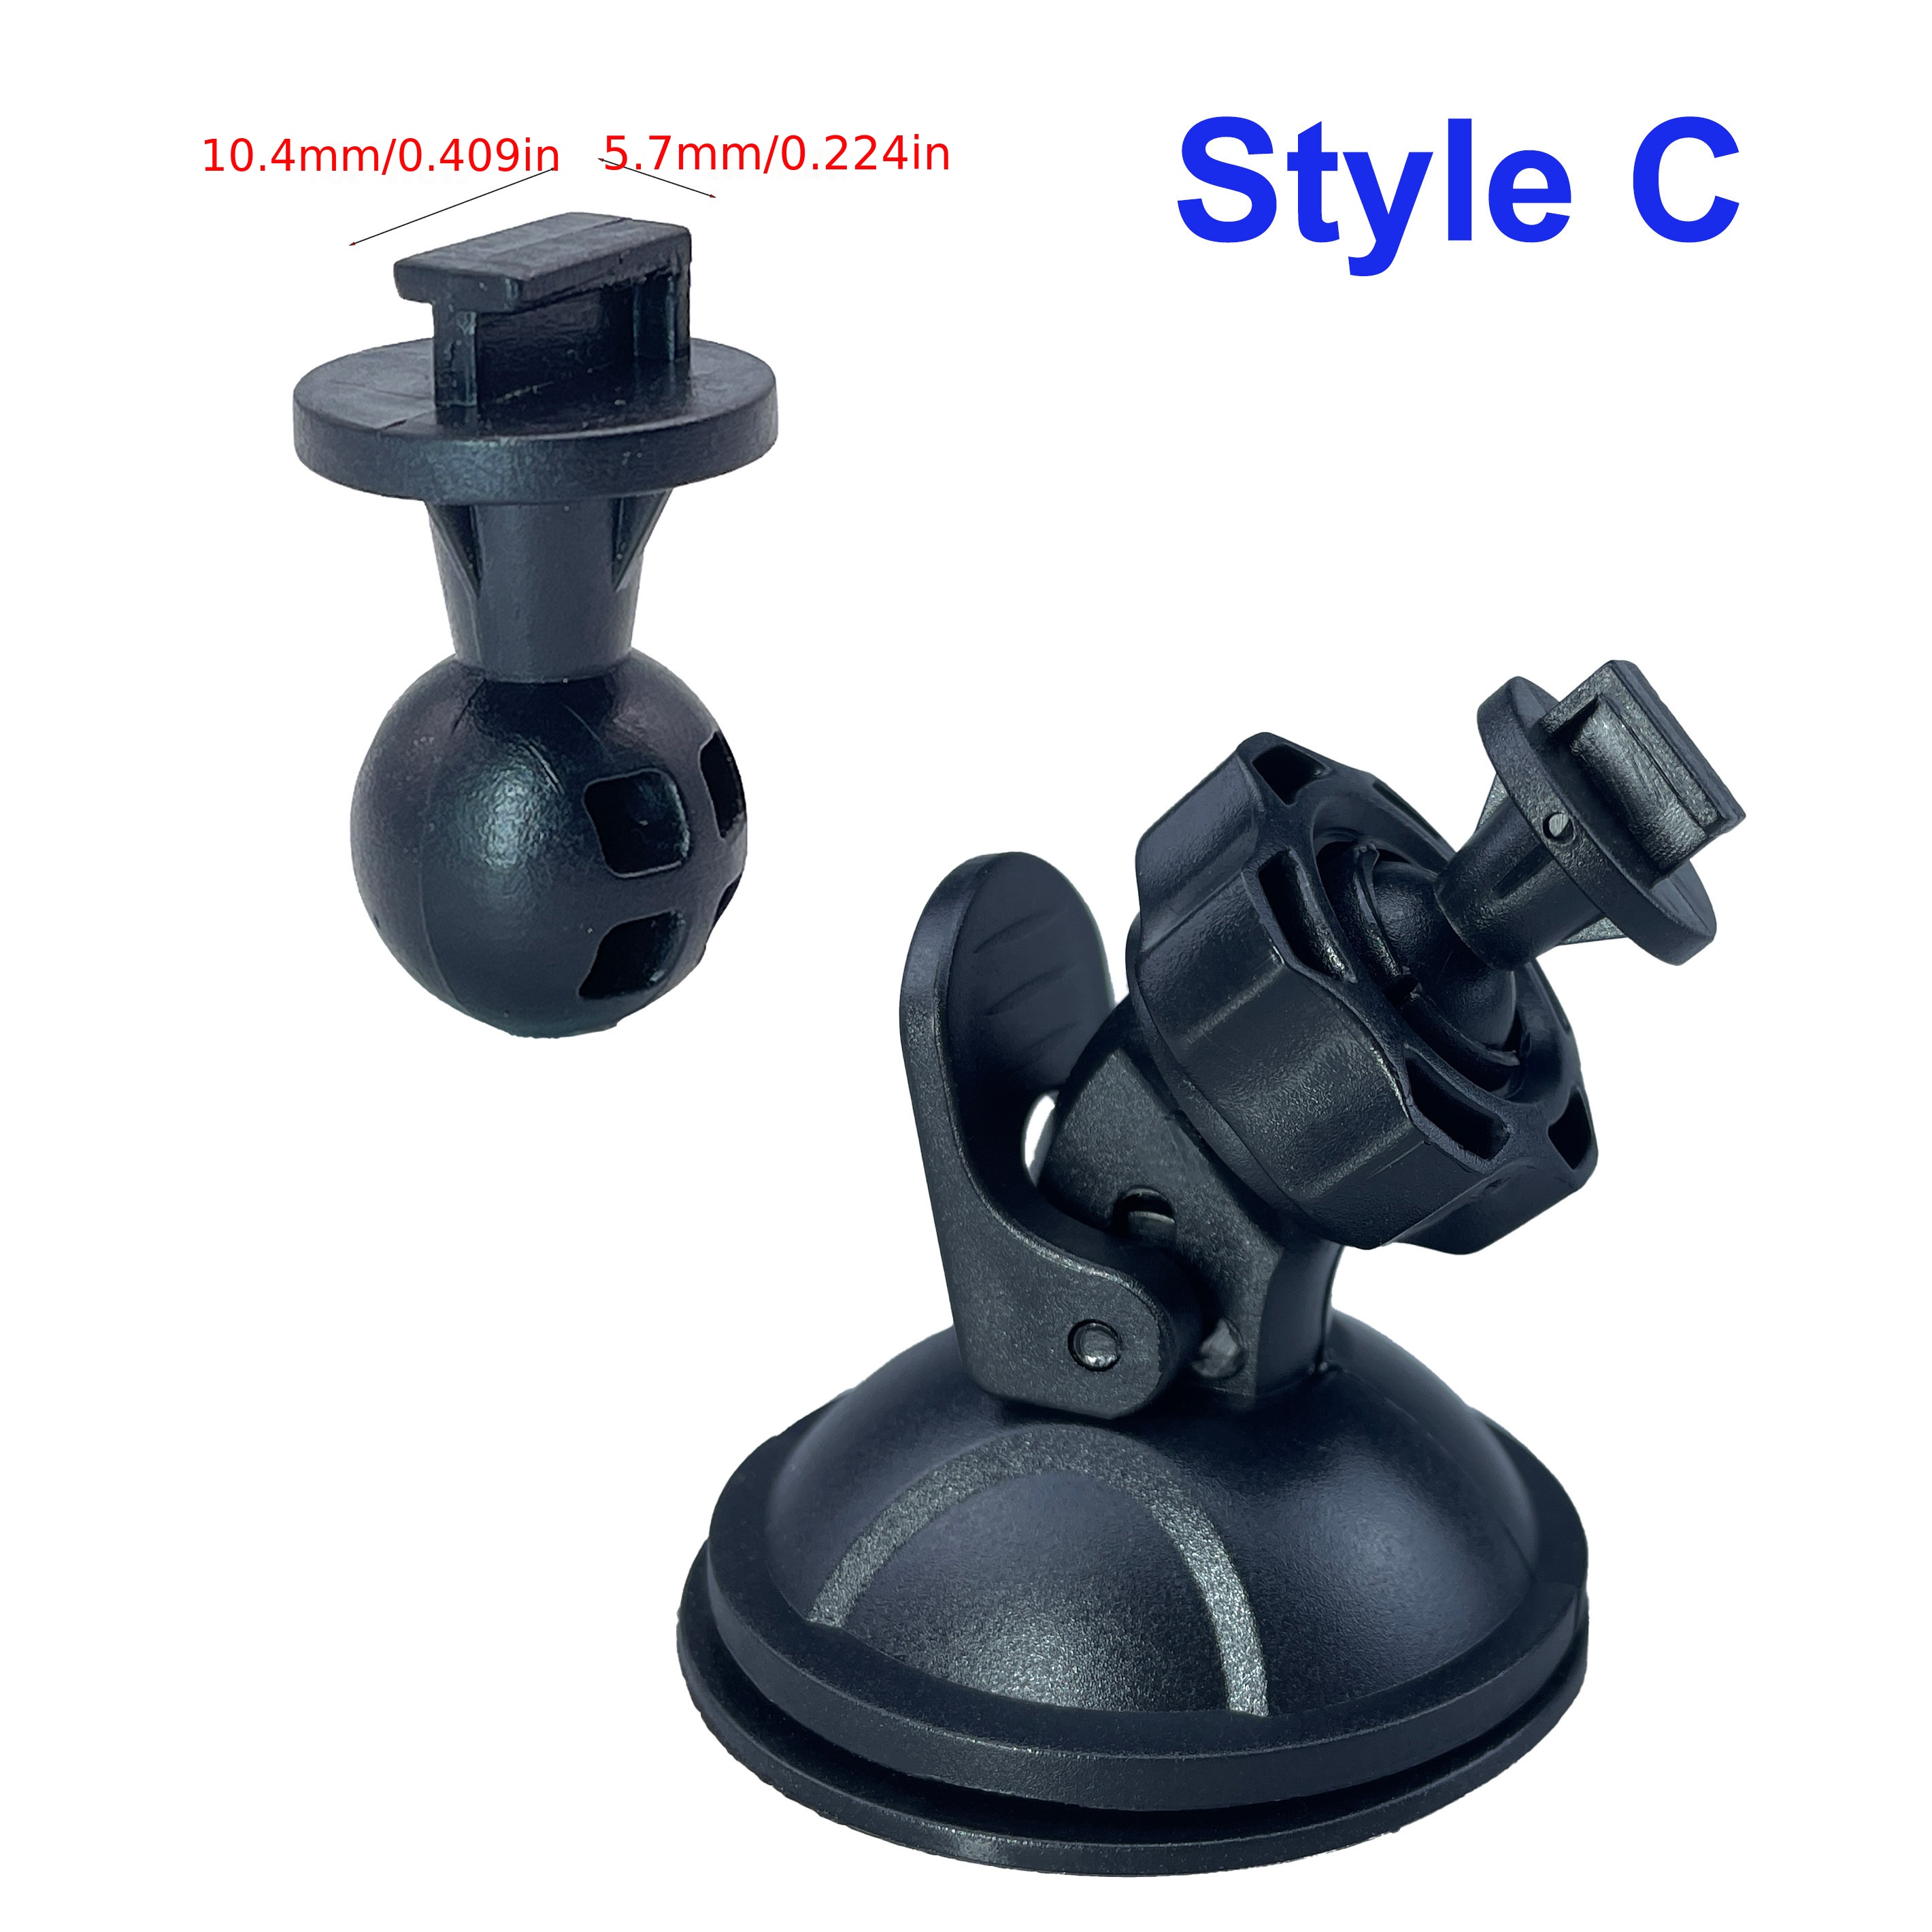 Suction-Mount Cup Holder